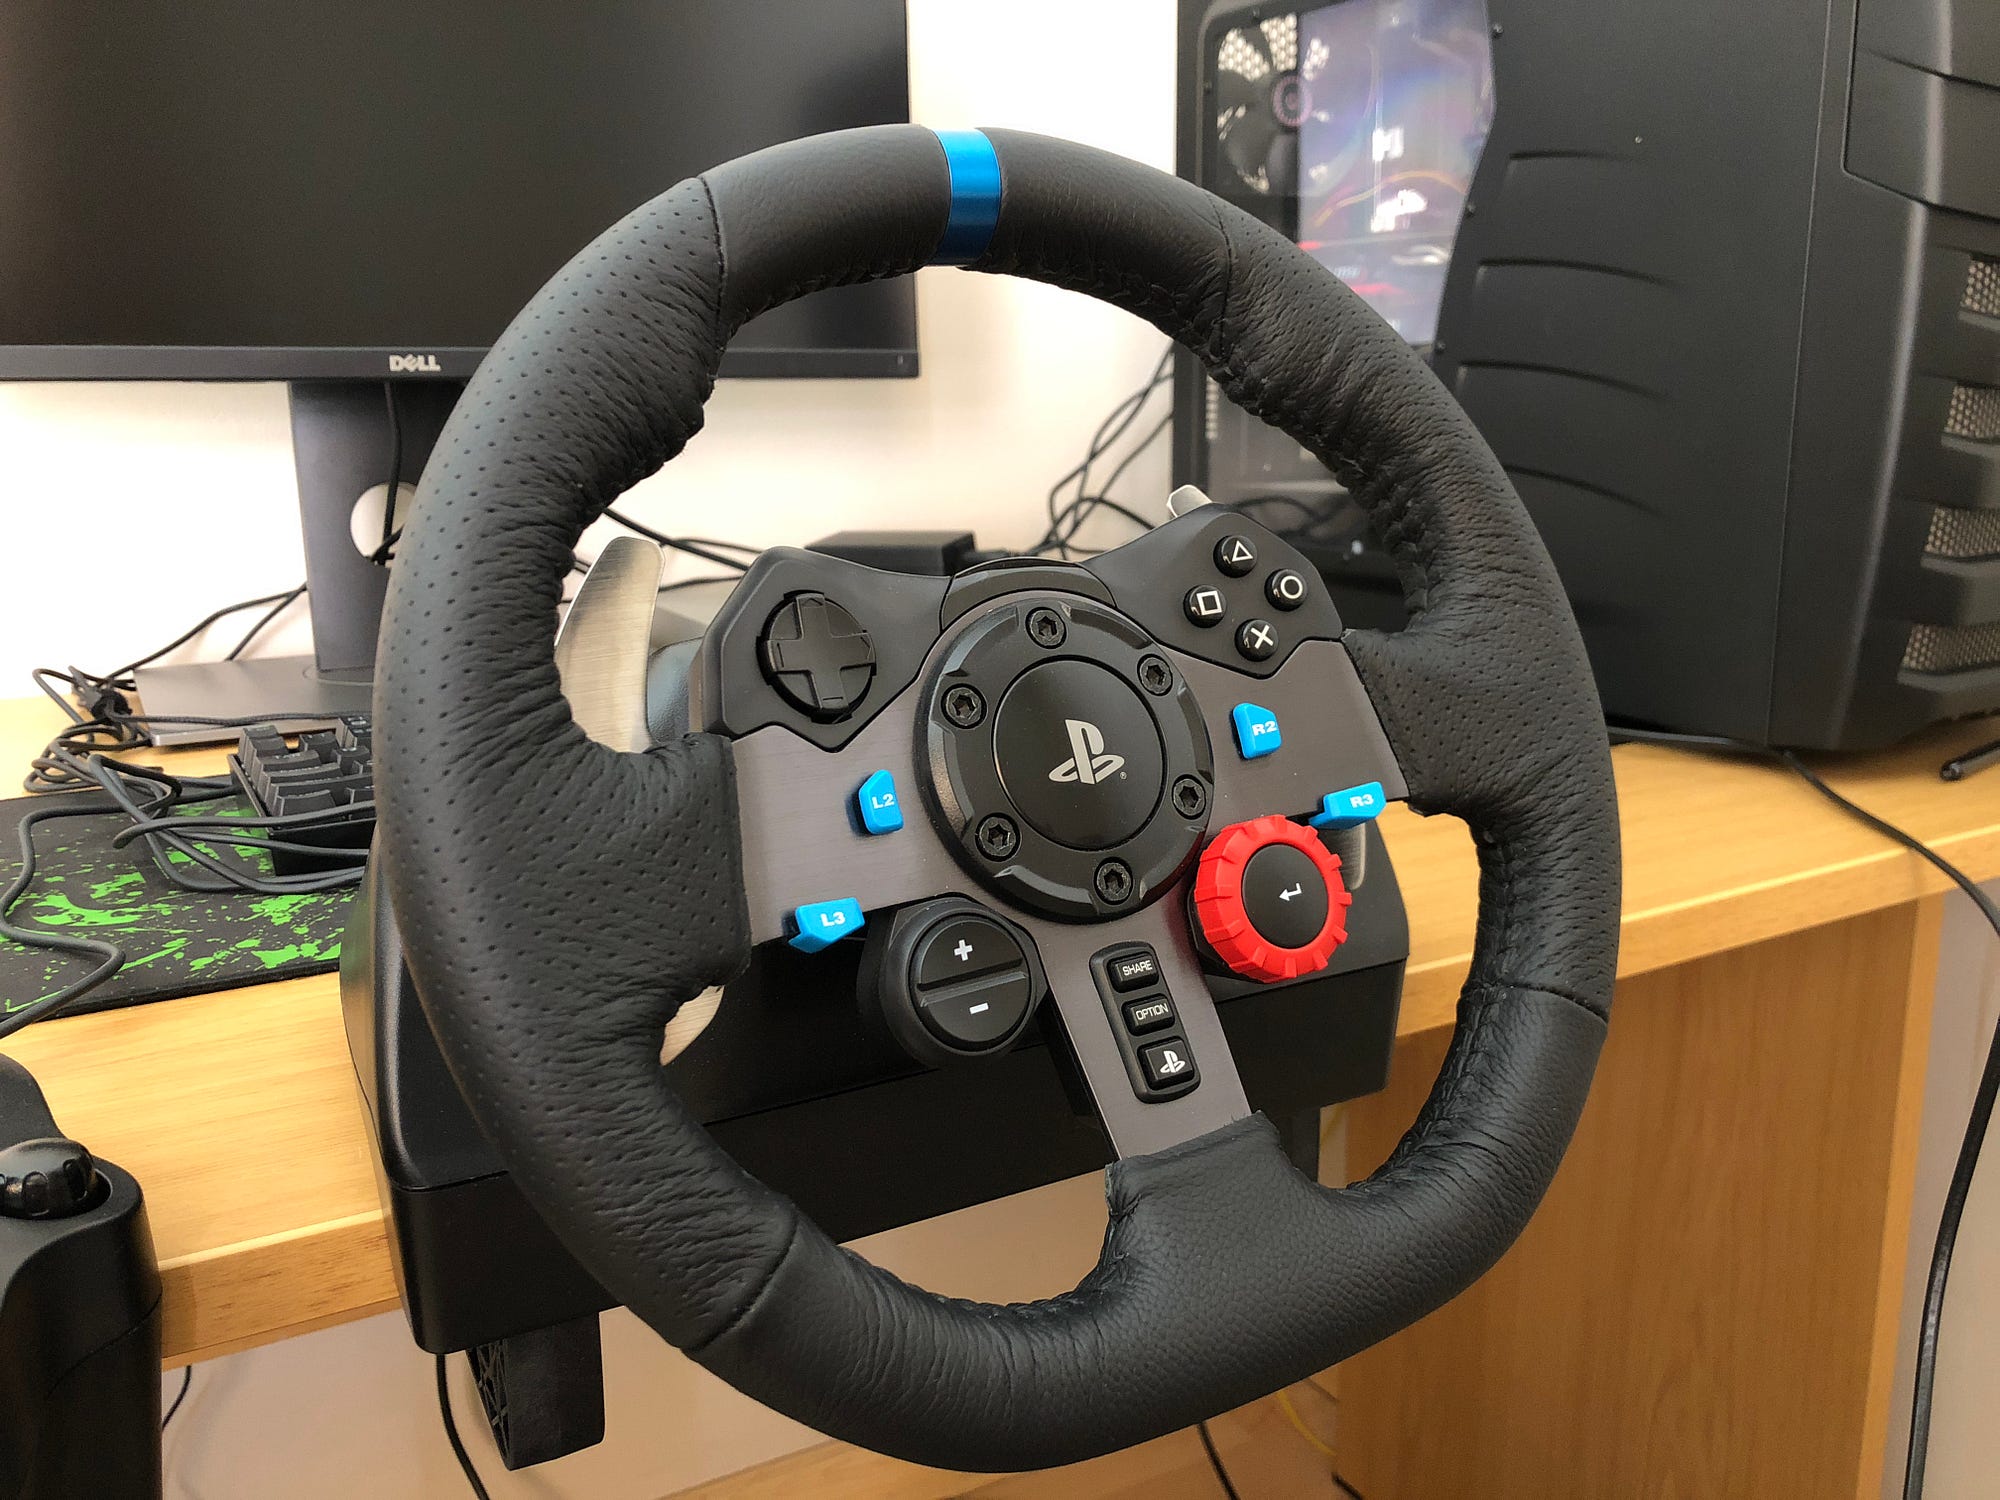 Get Logitech's excellent G29 or G920 wheel and pedals for nearly